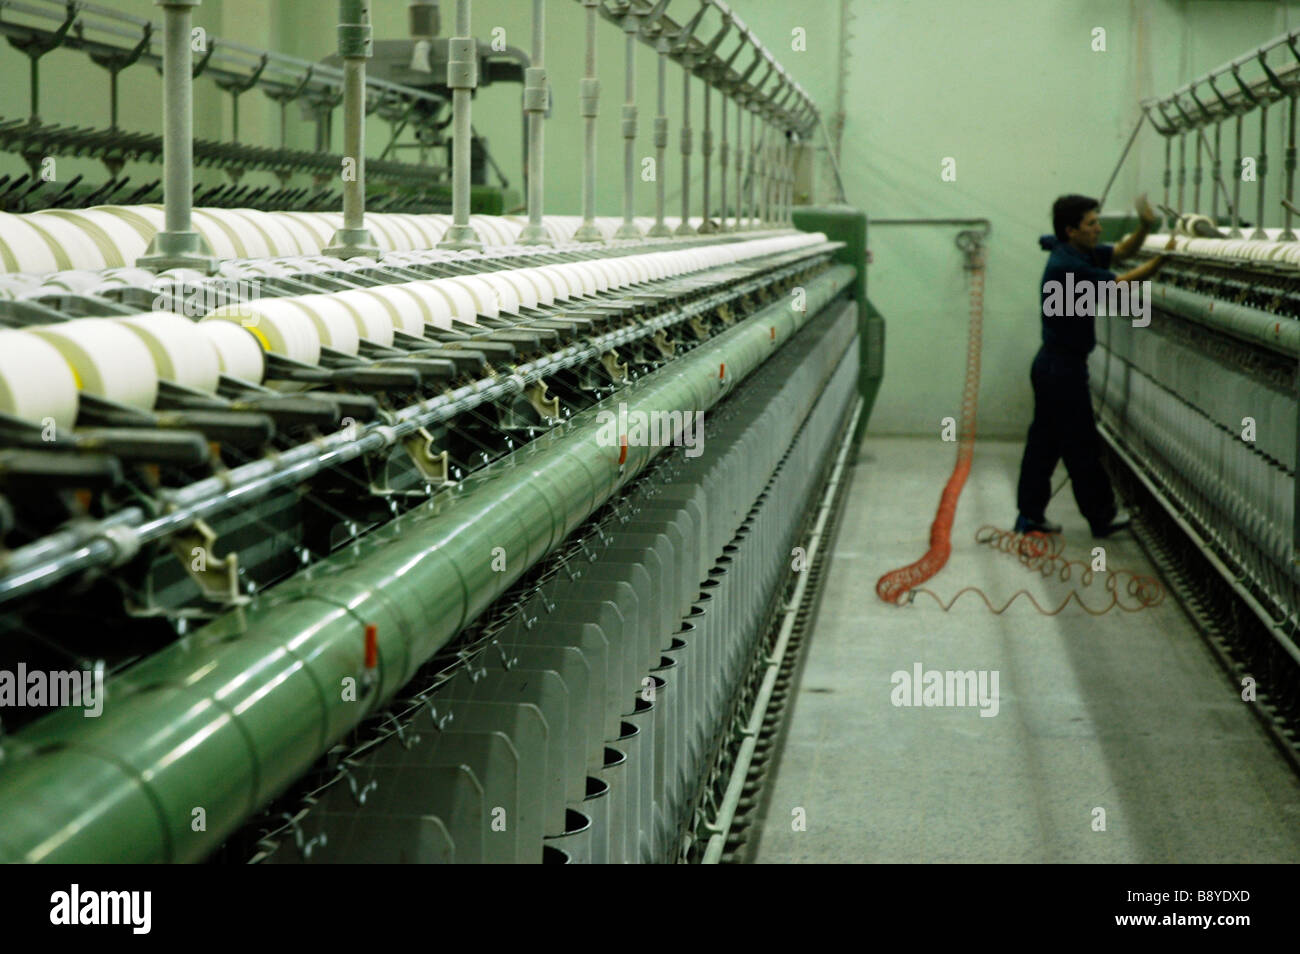 man working in cotton processing factory, he stands at the end of a line of machines Stock Photo